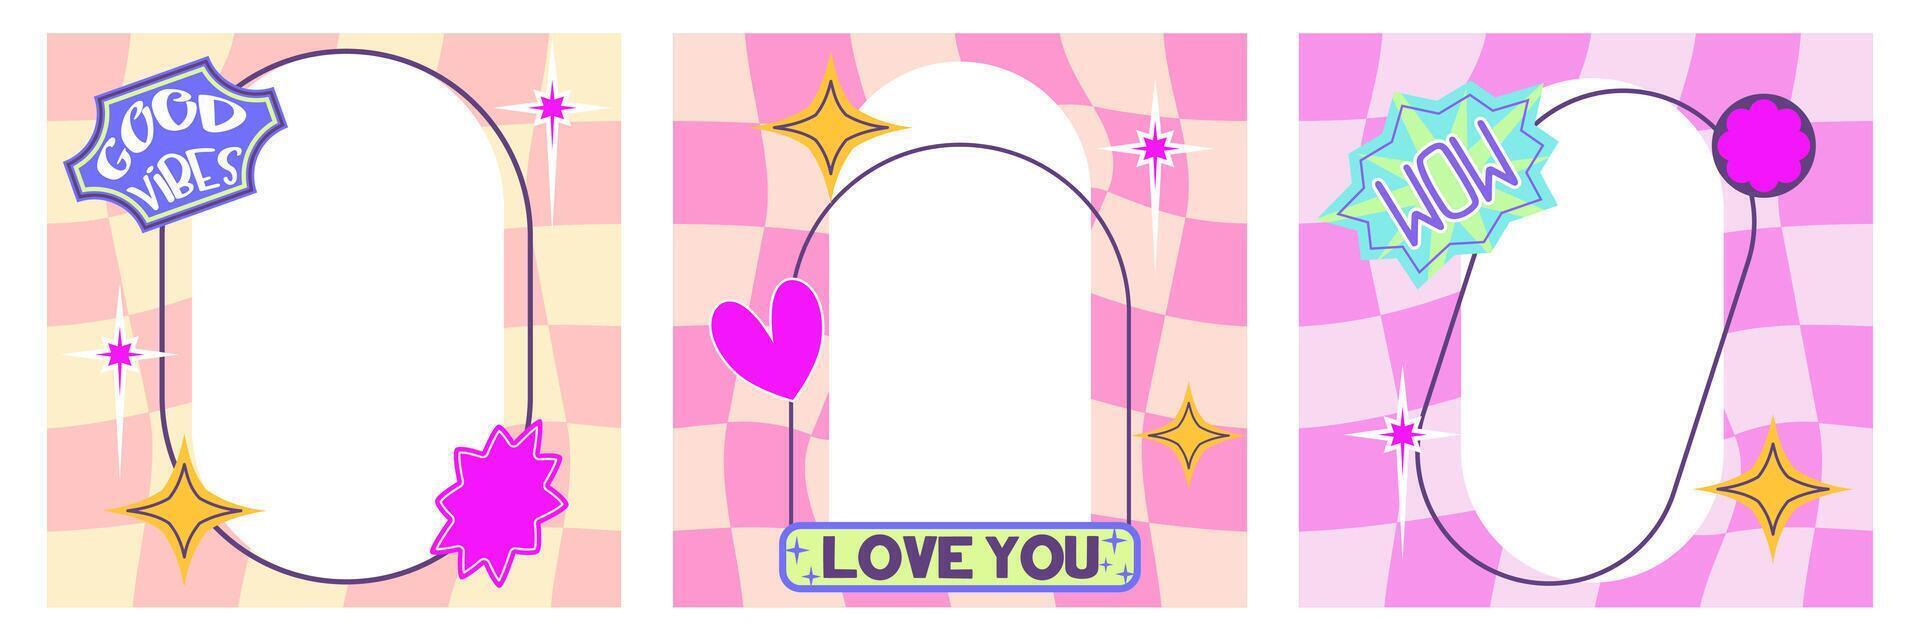 Y2K template with frame and chekerboard. 90s retro design with stickers and frame. Trendy aesthetic border with heart and shape. Flat illustration vector